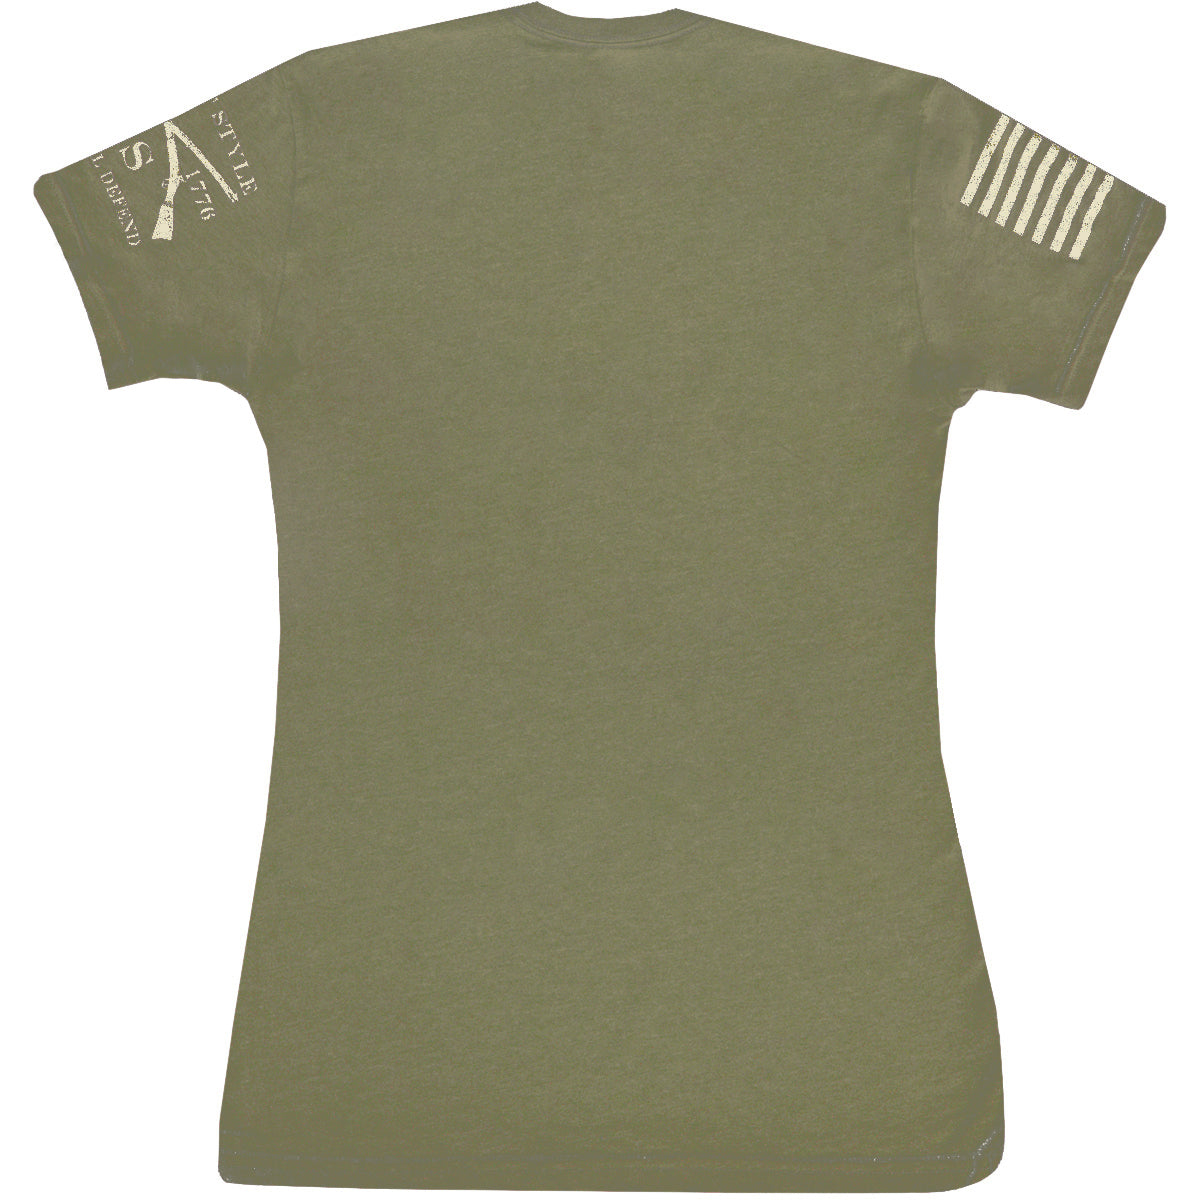 Grunt Style Women's Come And Take It 2A Edition T-Shirt - Military Green Grunt Style